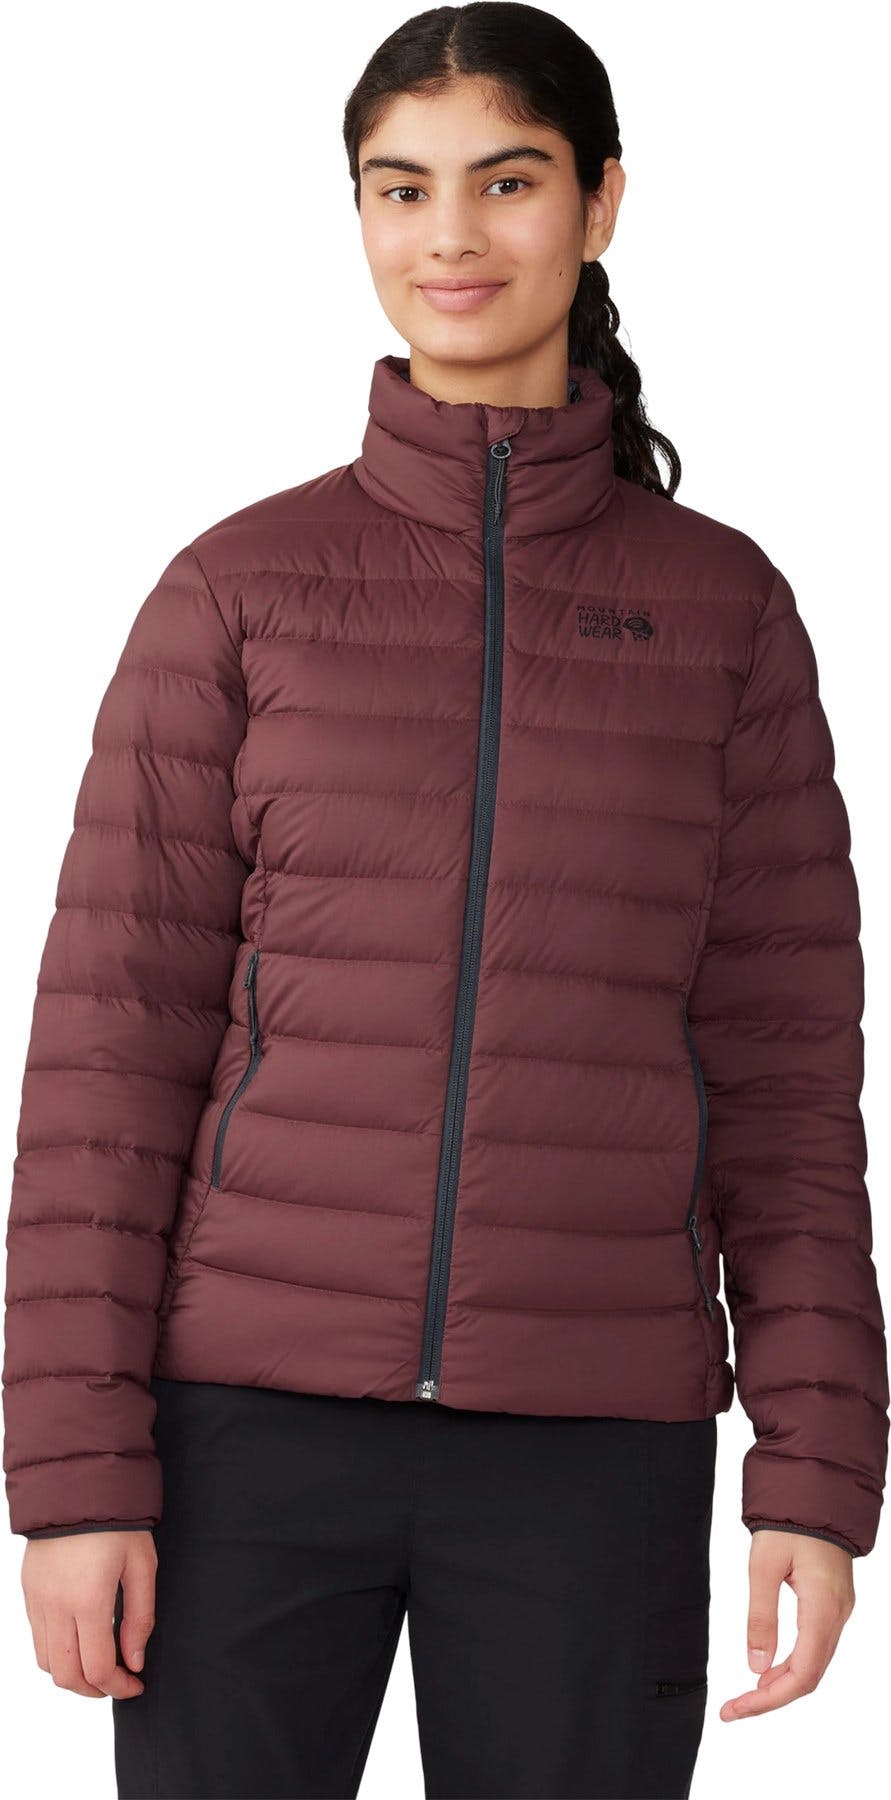 Product image for Deloro™ Down Jacket - Women's